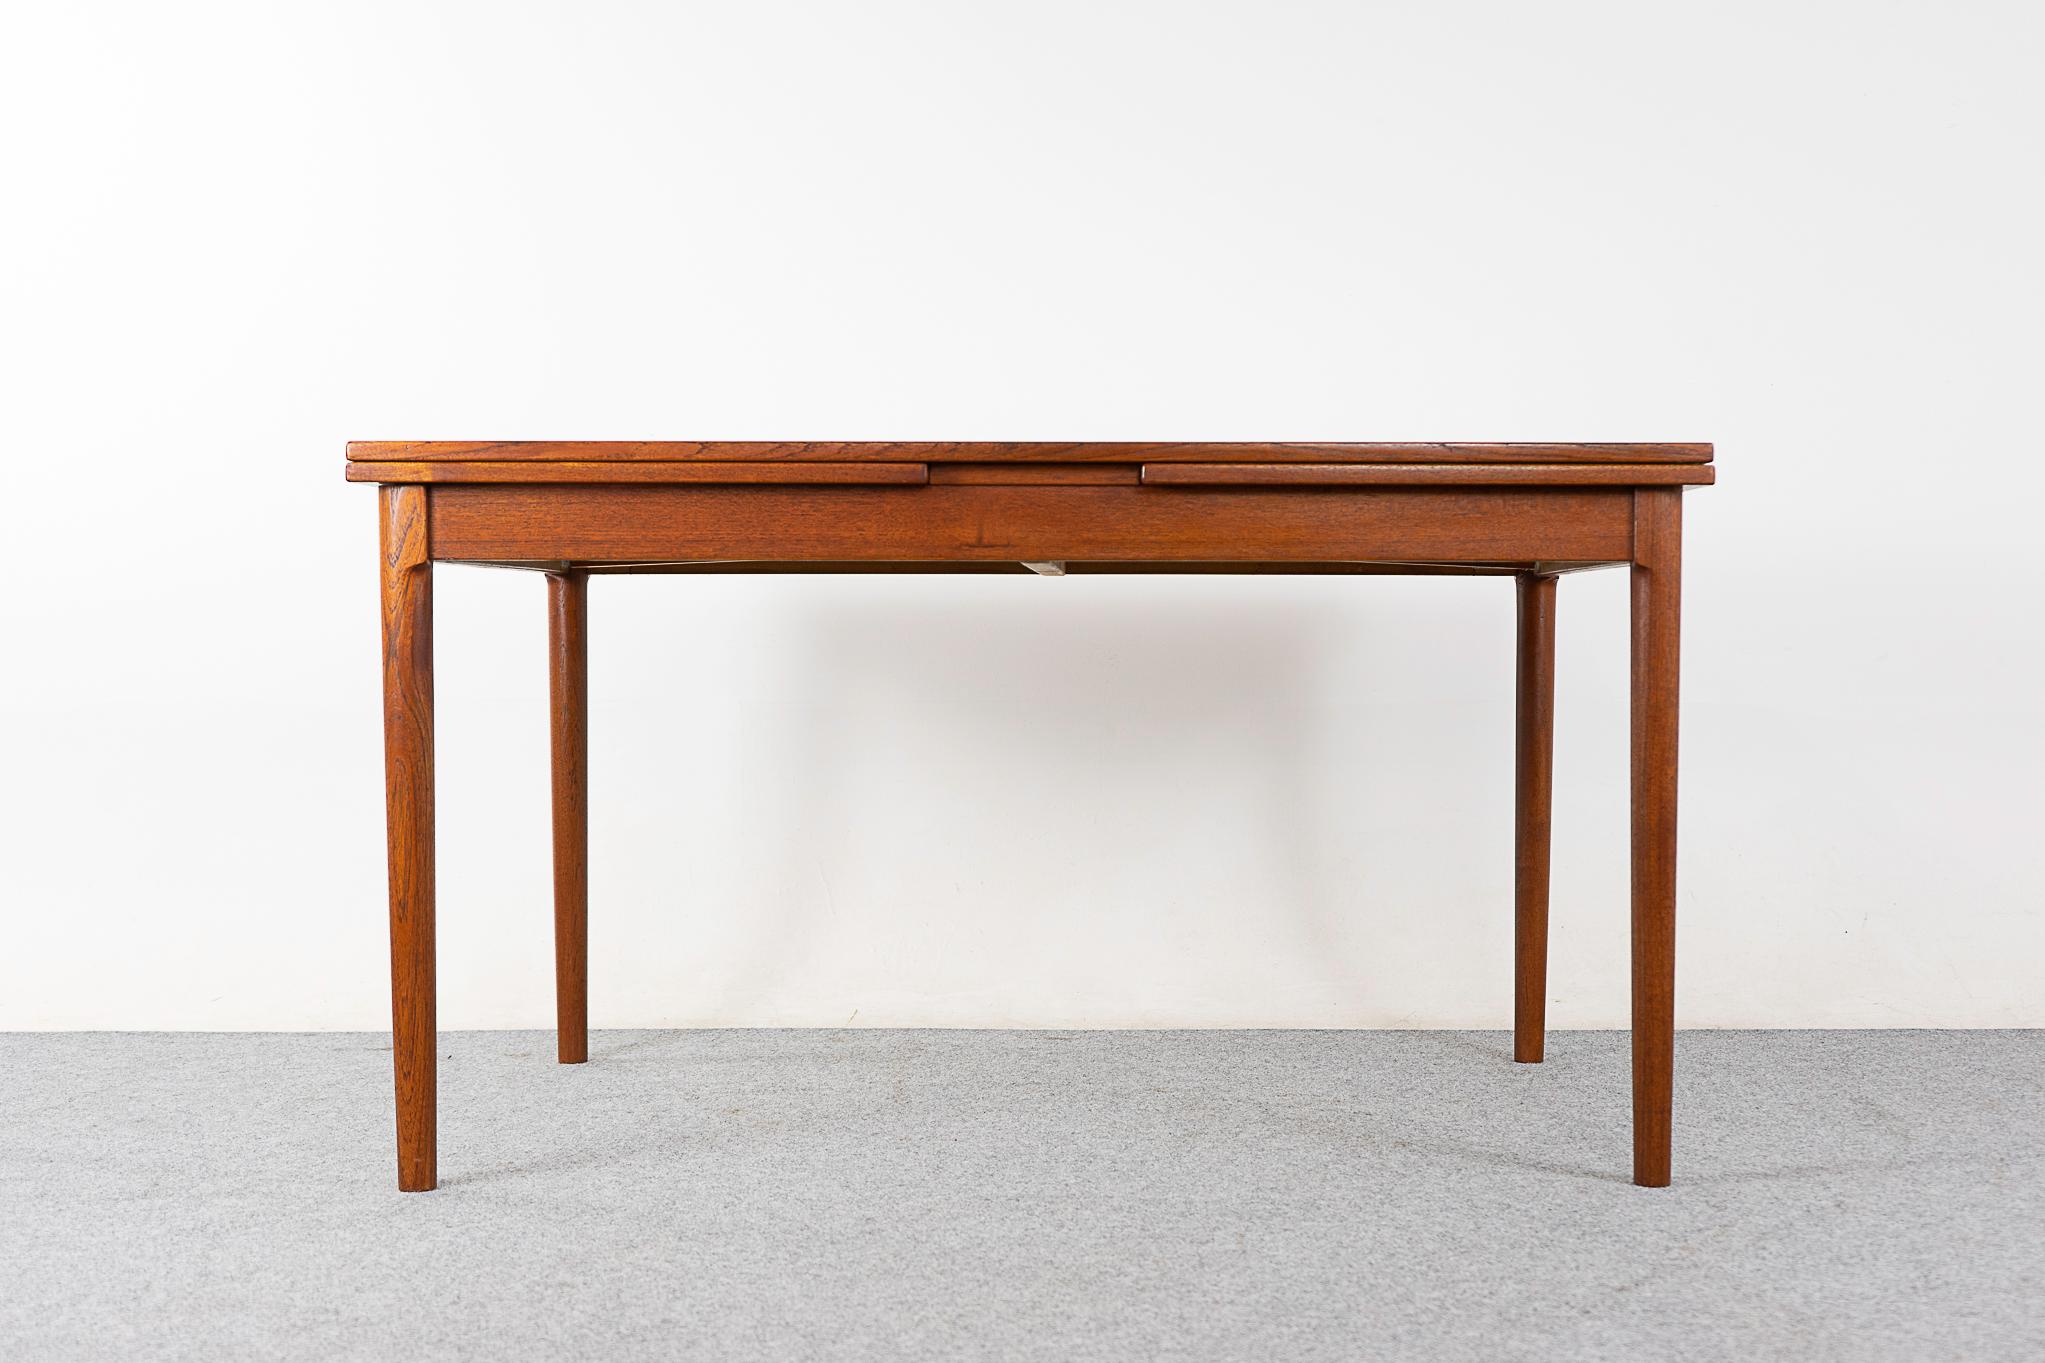 Teak mid-century draw leaf dining table, by Kai Winding circa 1960's. Beautiful quality table, top is framed in a generous solid wood edge, center boasts highly figured veneer. Leaves slide out from each end to expand the table surface by nearly two